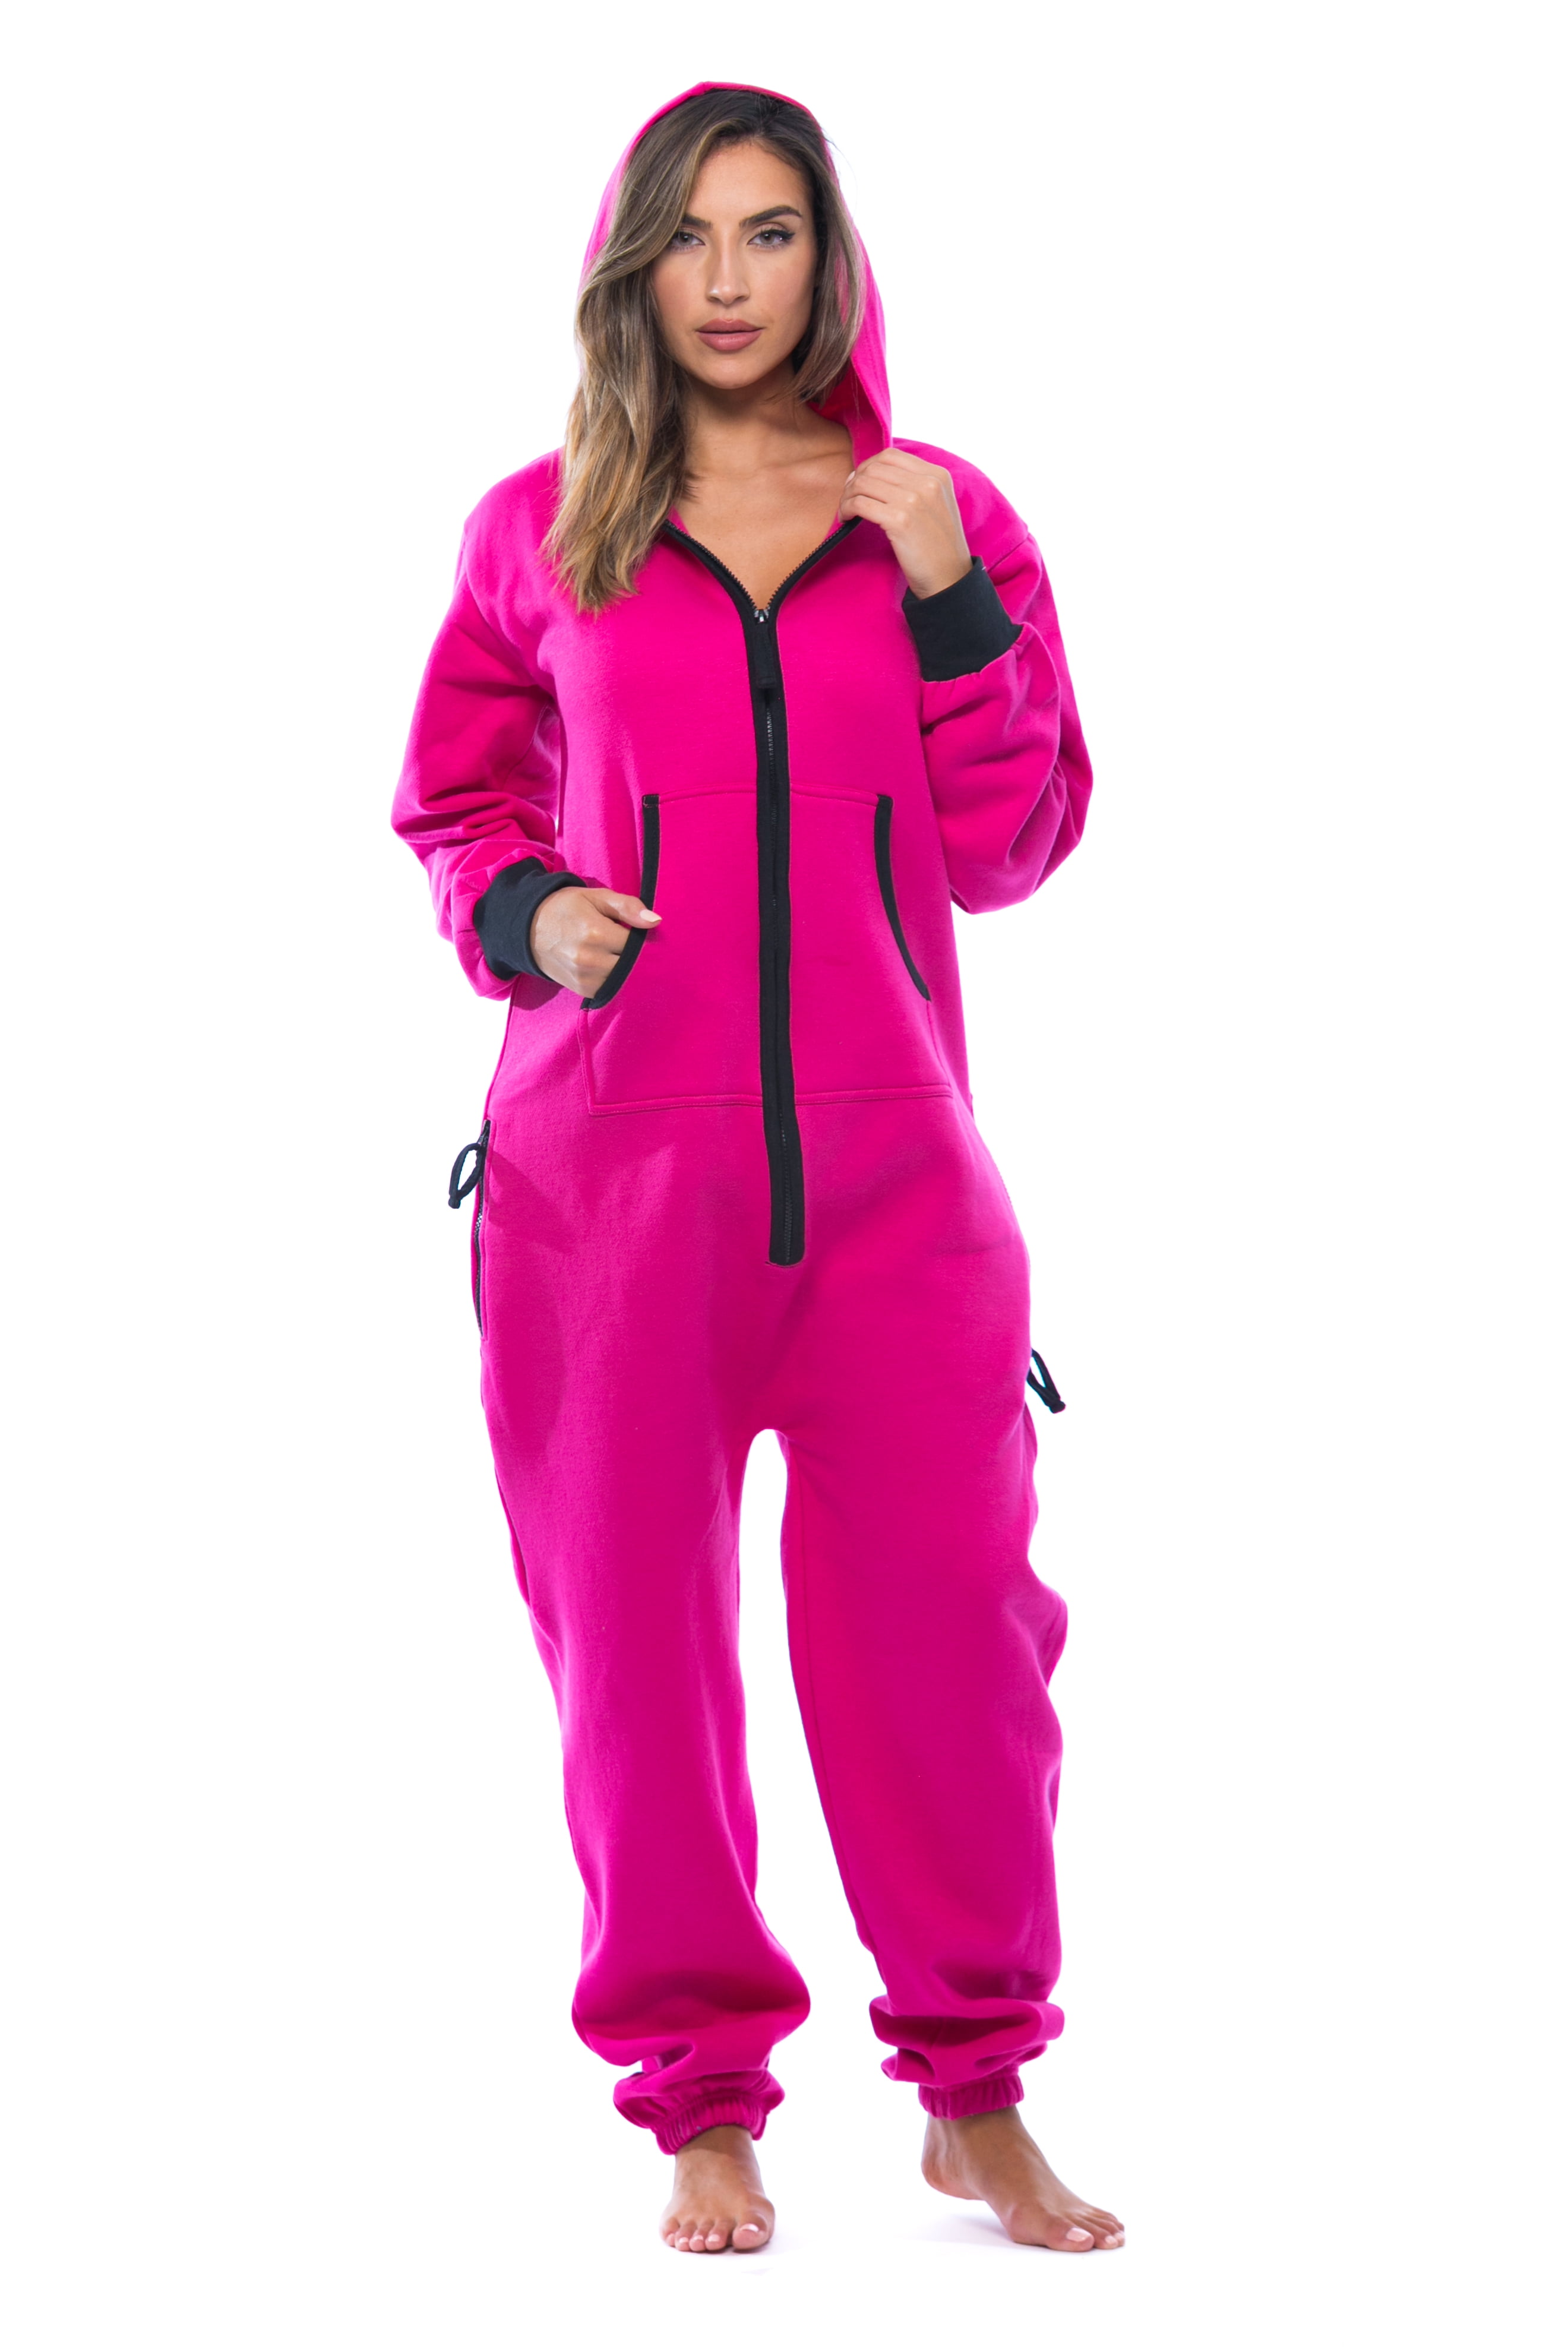 onesie for adult